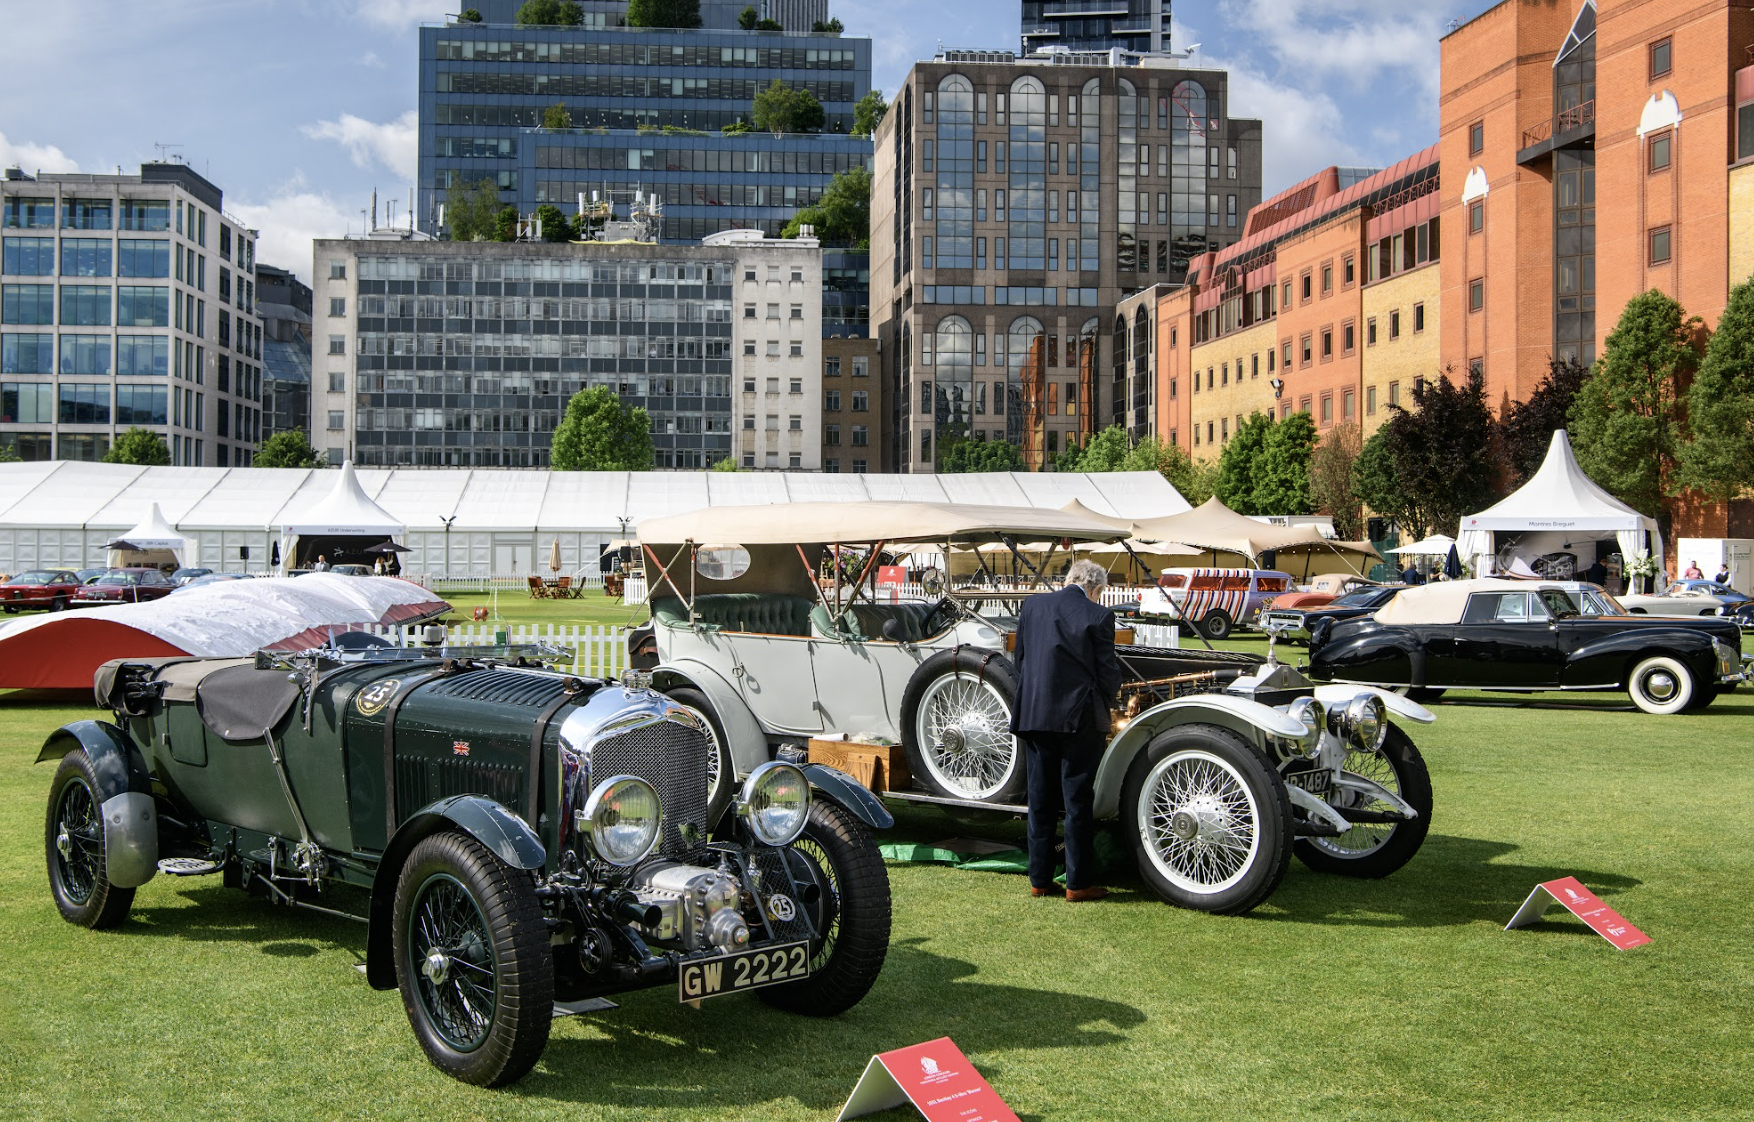 London Concours Hospitality with Searcys and Veuve Clicquot